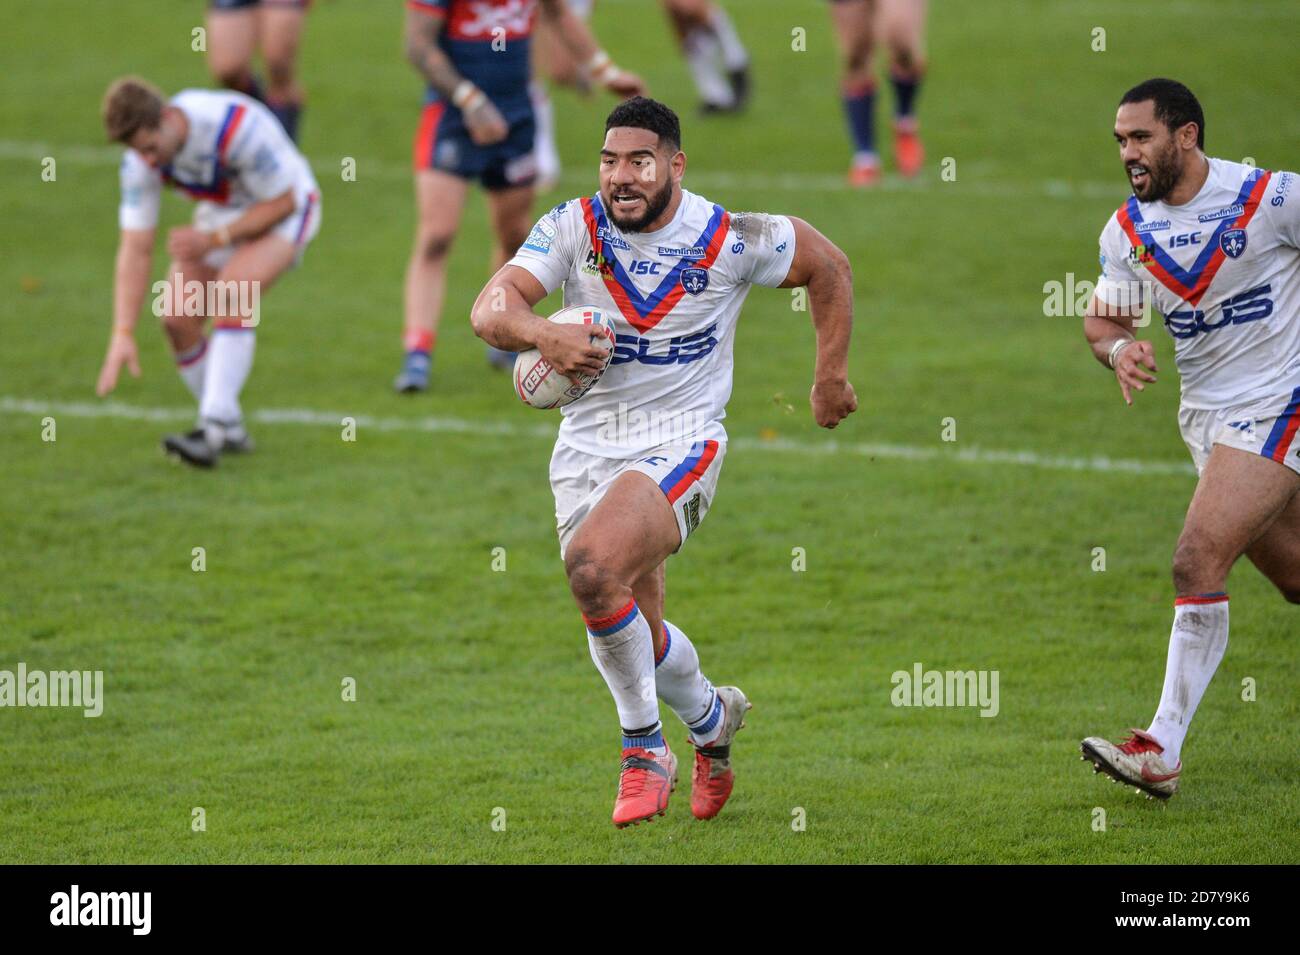 Wakefield Trinity's Kelepi Tanginoa in action during the game Stock Photo